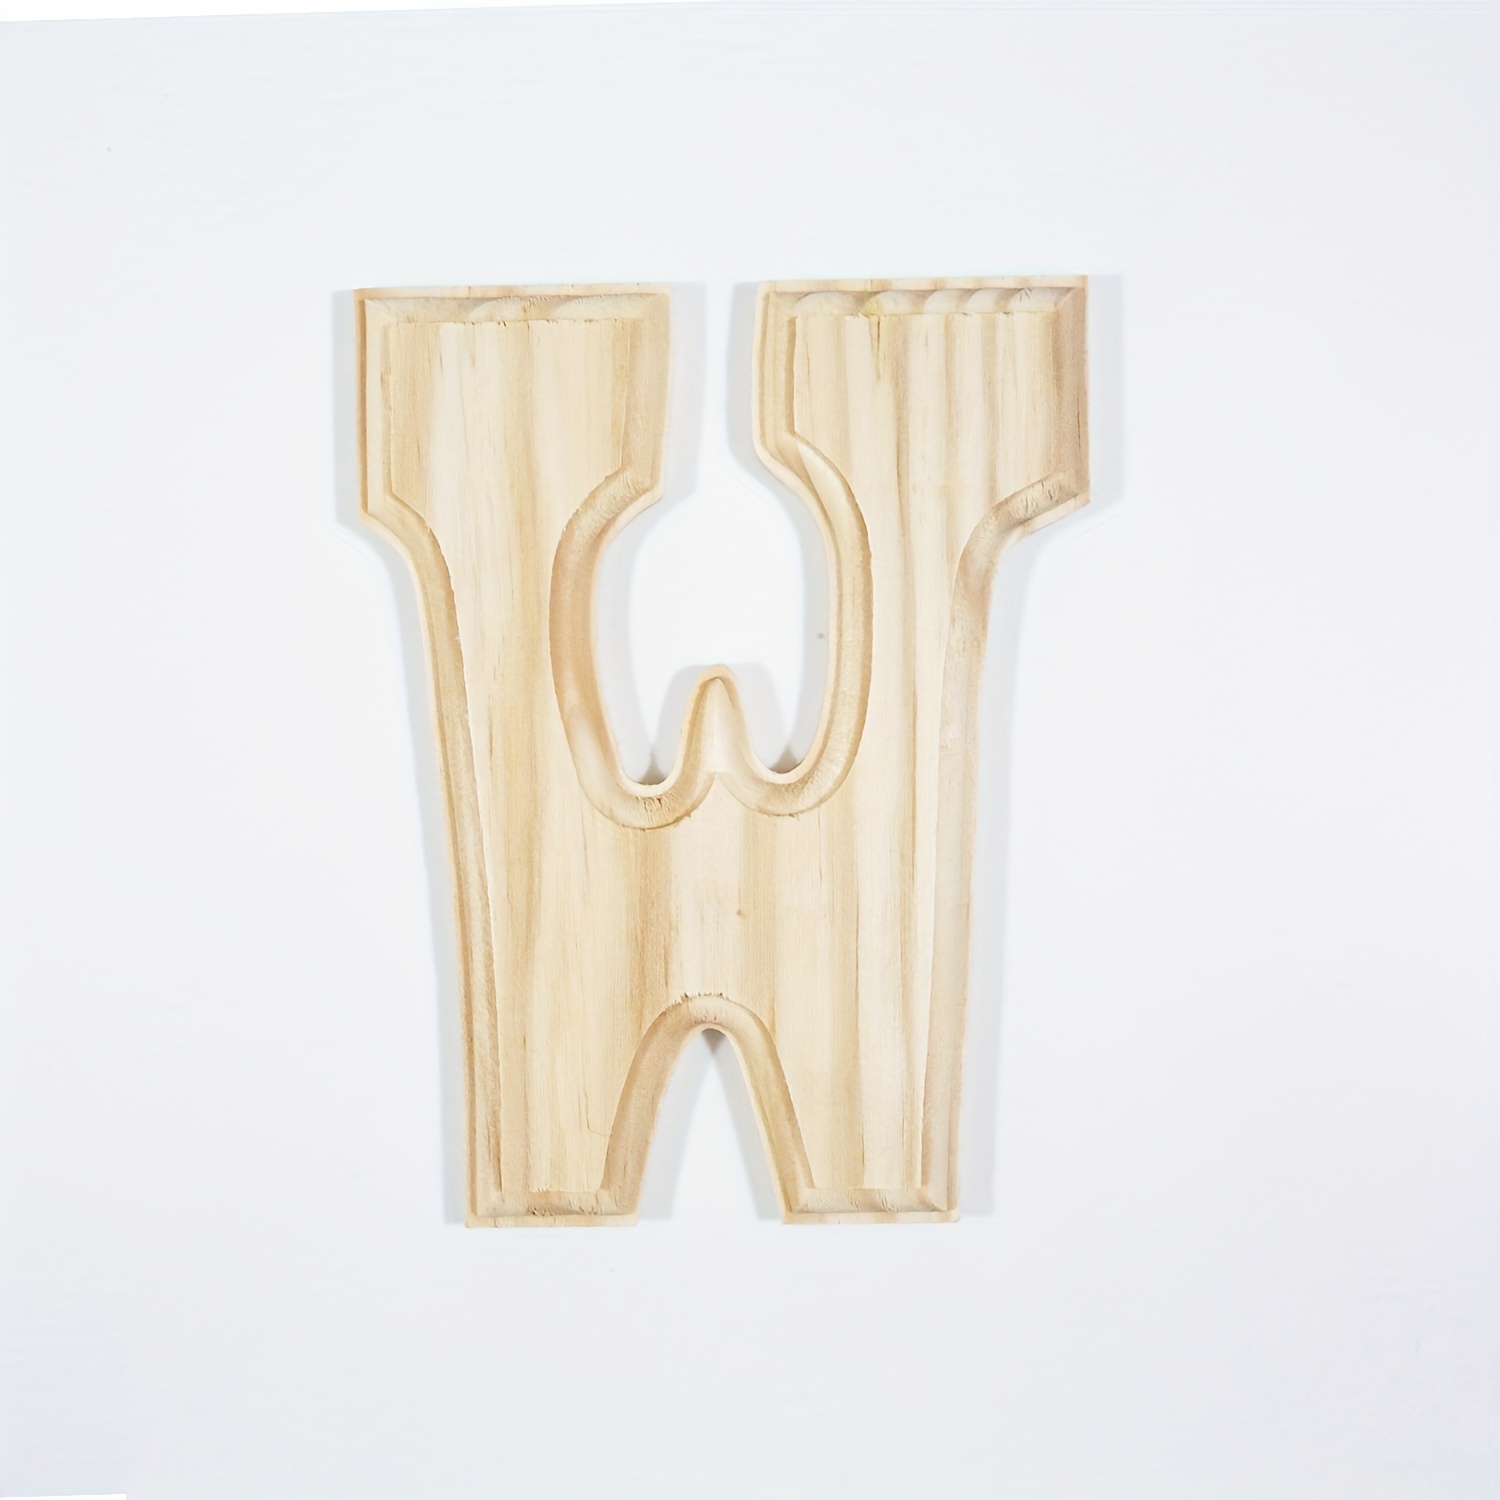 White Wood Letters 6 Inch, Wood Letters for DIY Party Projects (W)